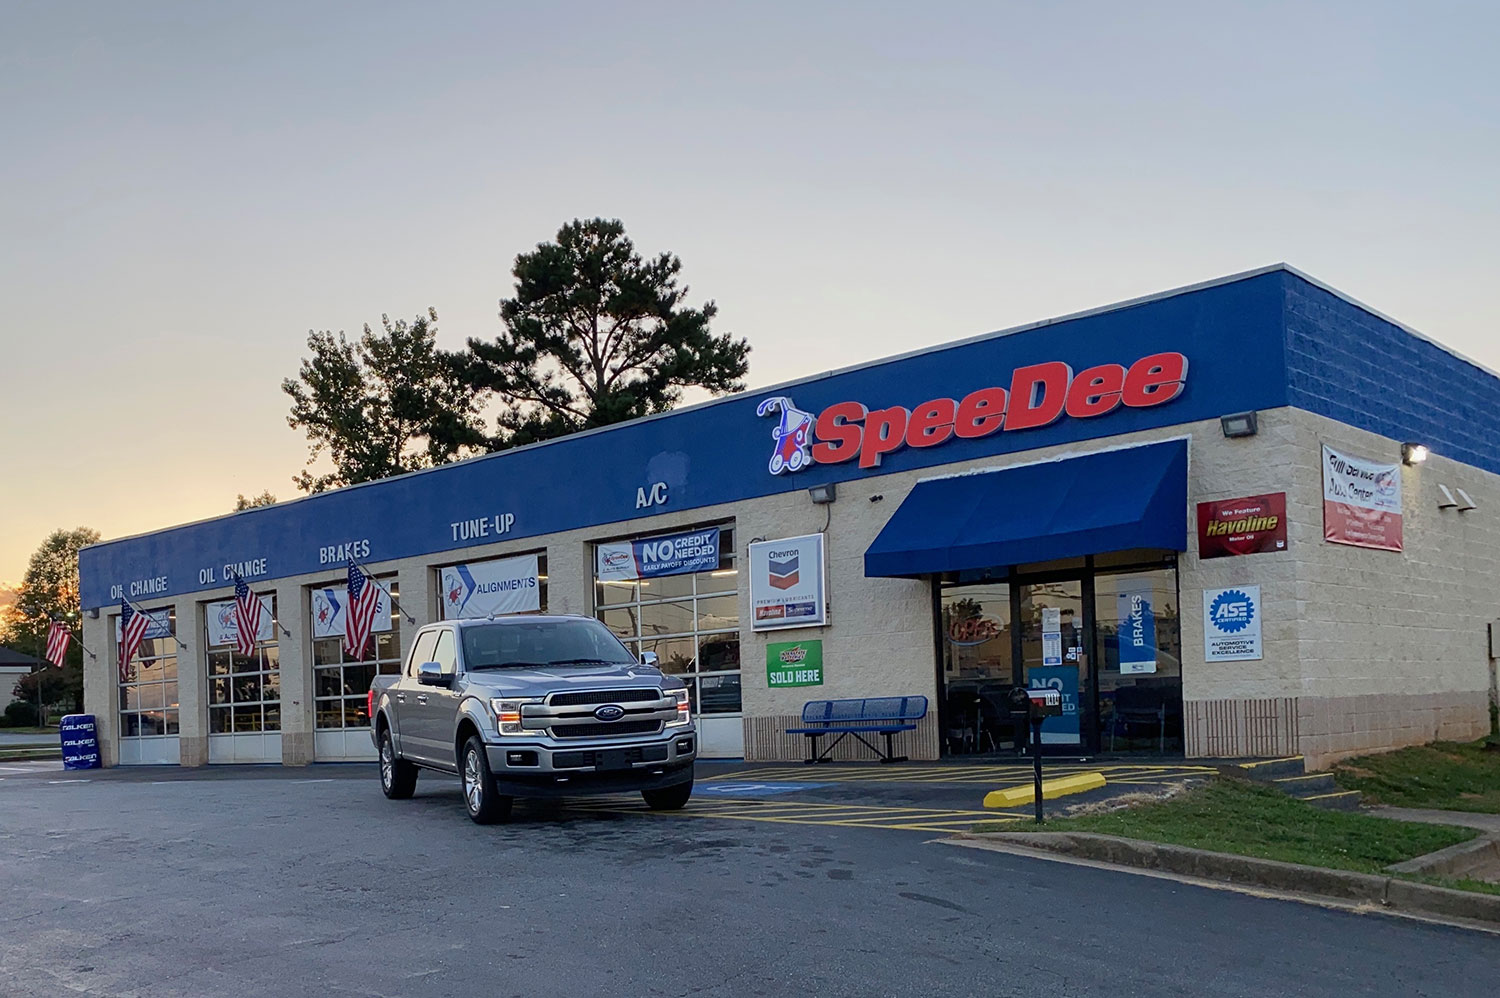 Exterior shot of a SpeeDee Oil Change & Auto Service center. A pickup truck is shown pulling away from one of the open service bays.